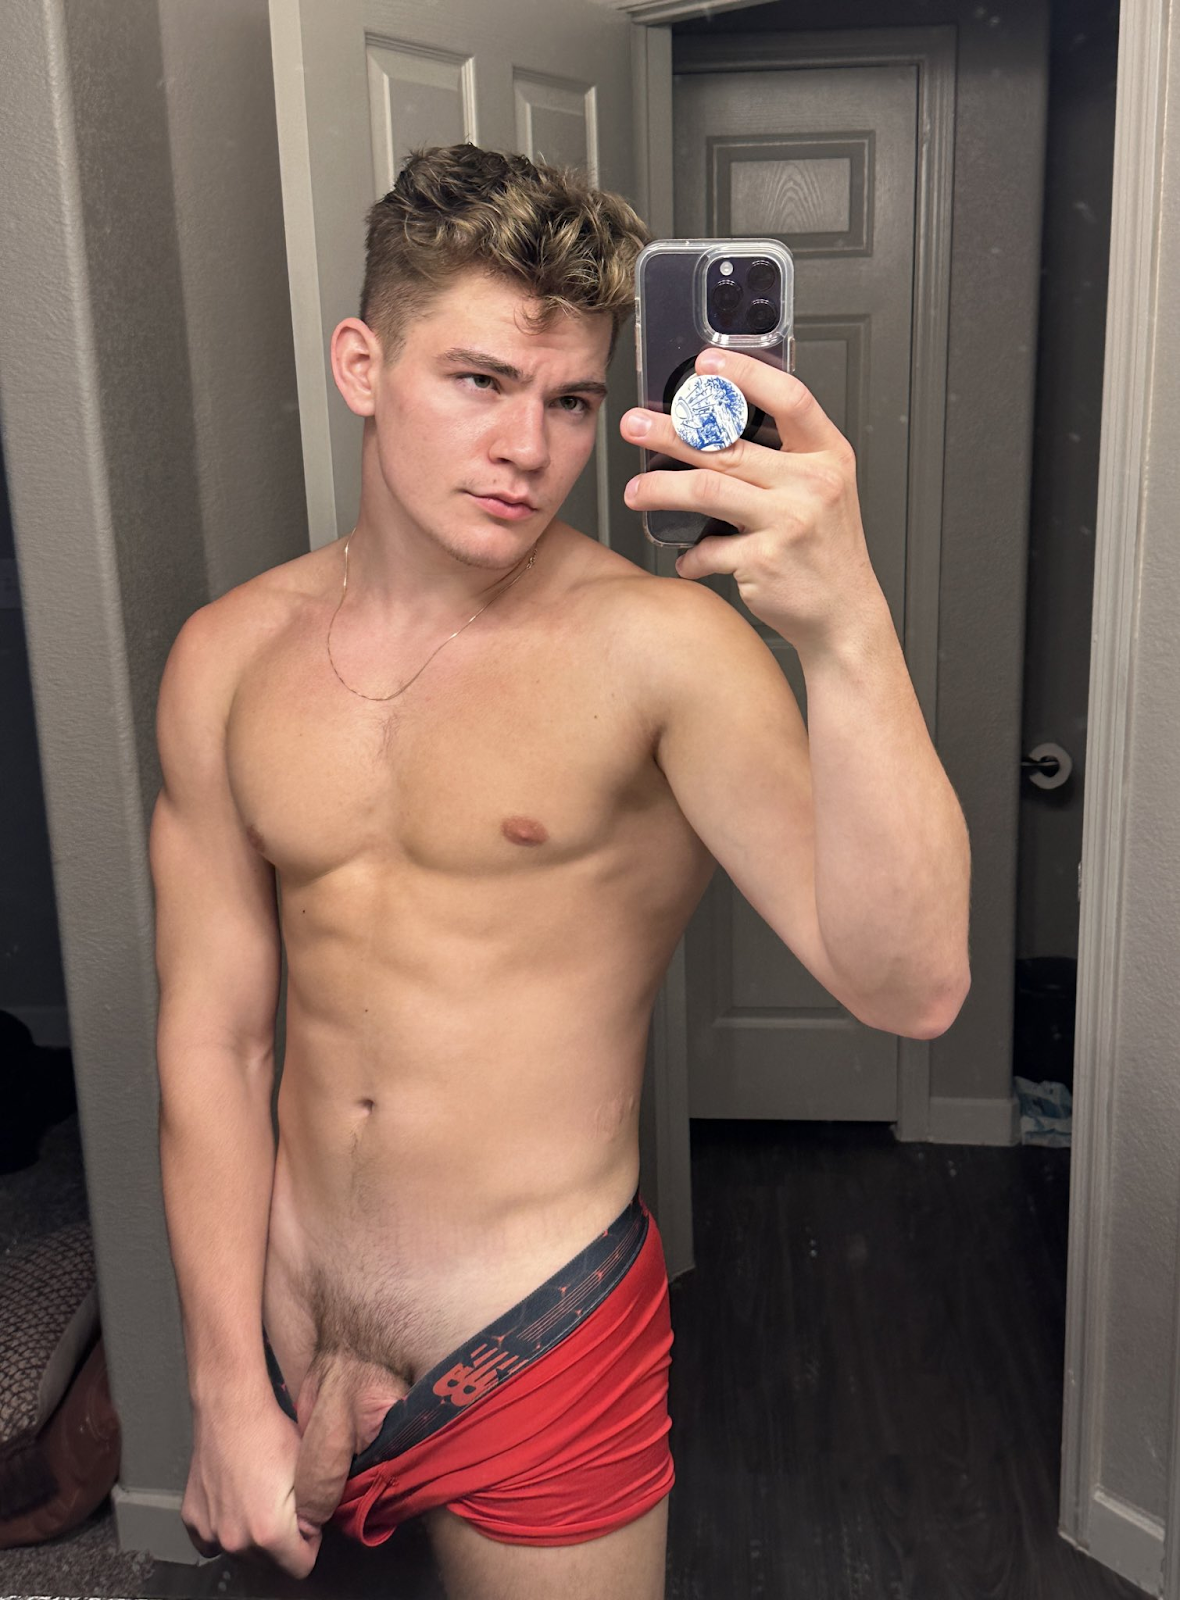 Oliver Marks standing in the bathroom mirror taking a selfie while pulling down his red undies and revealing his flaccid uncut cock